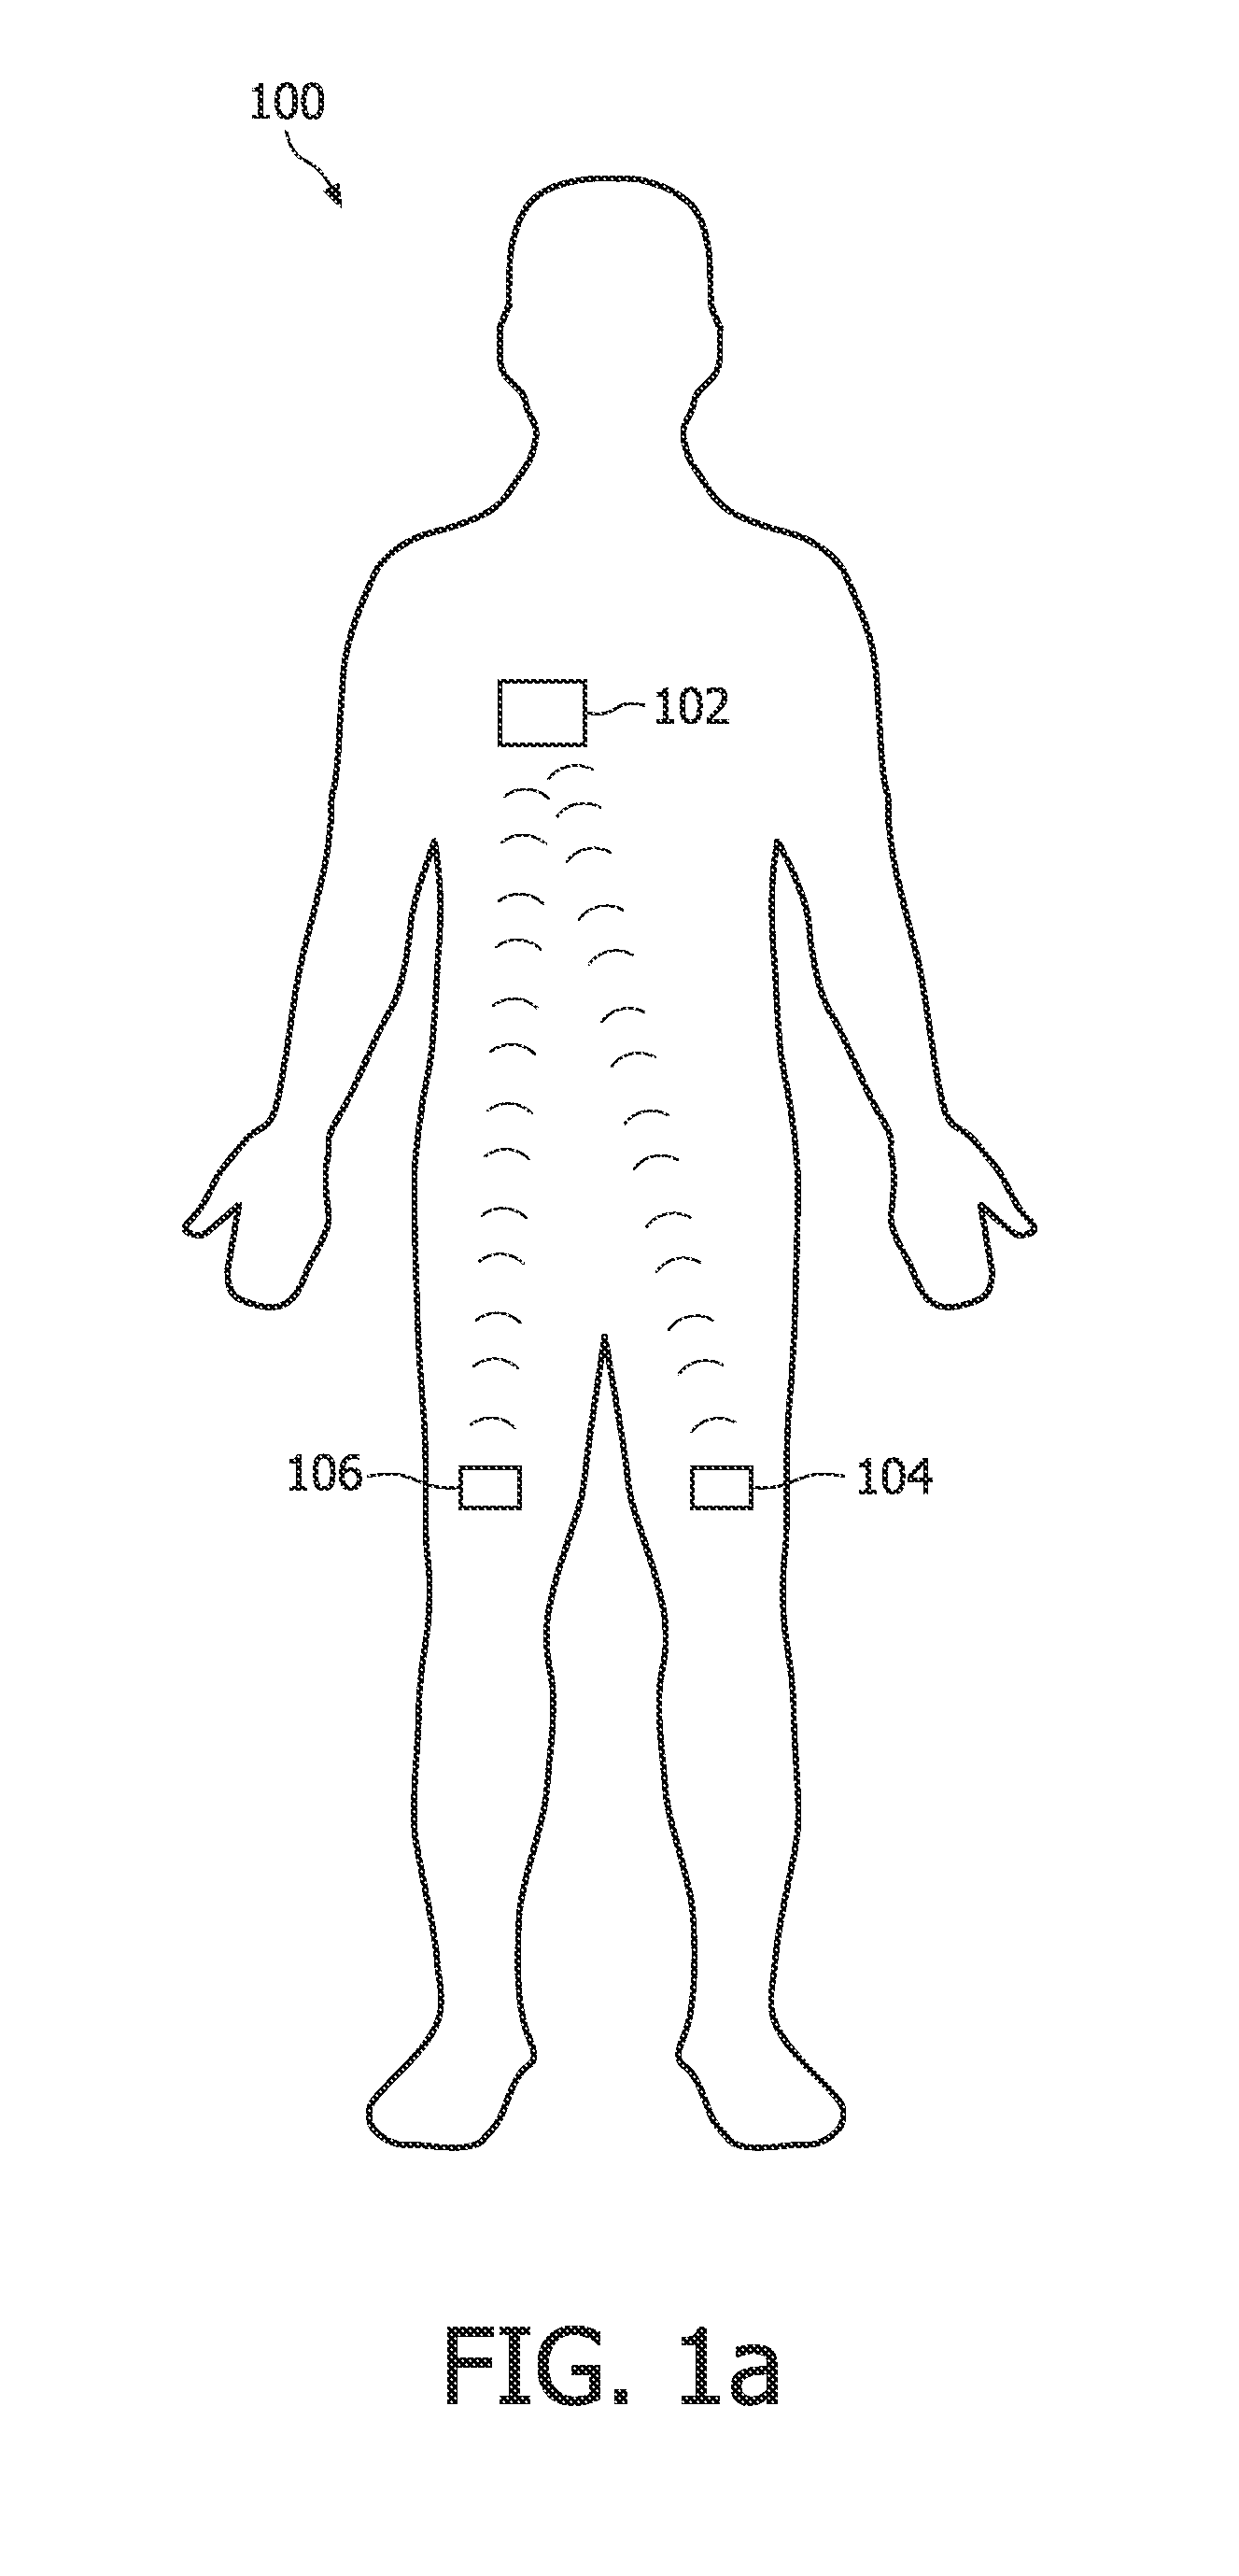 System and method for communicating information between implantable devices